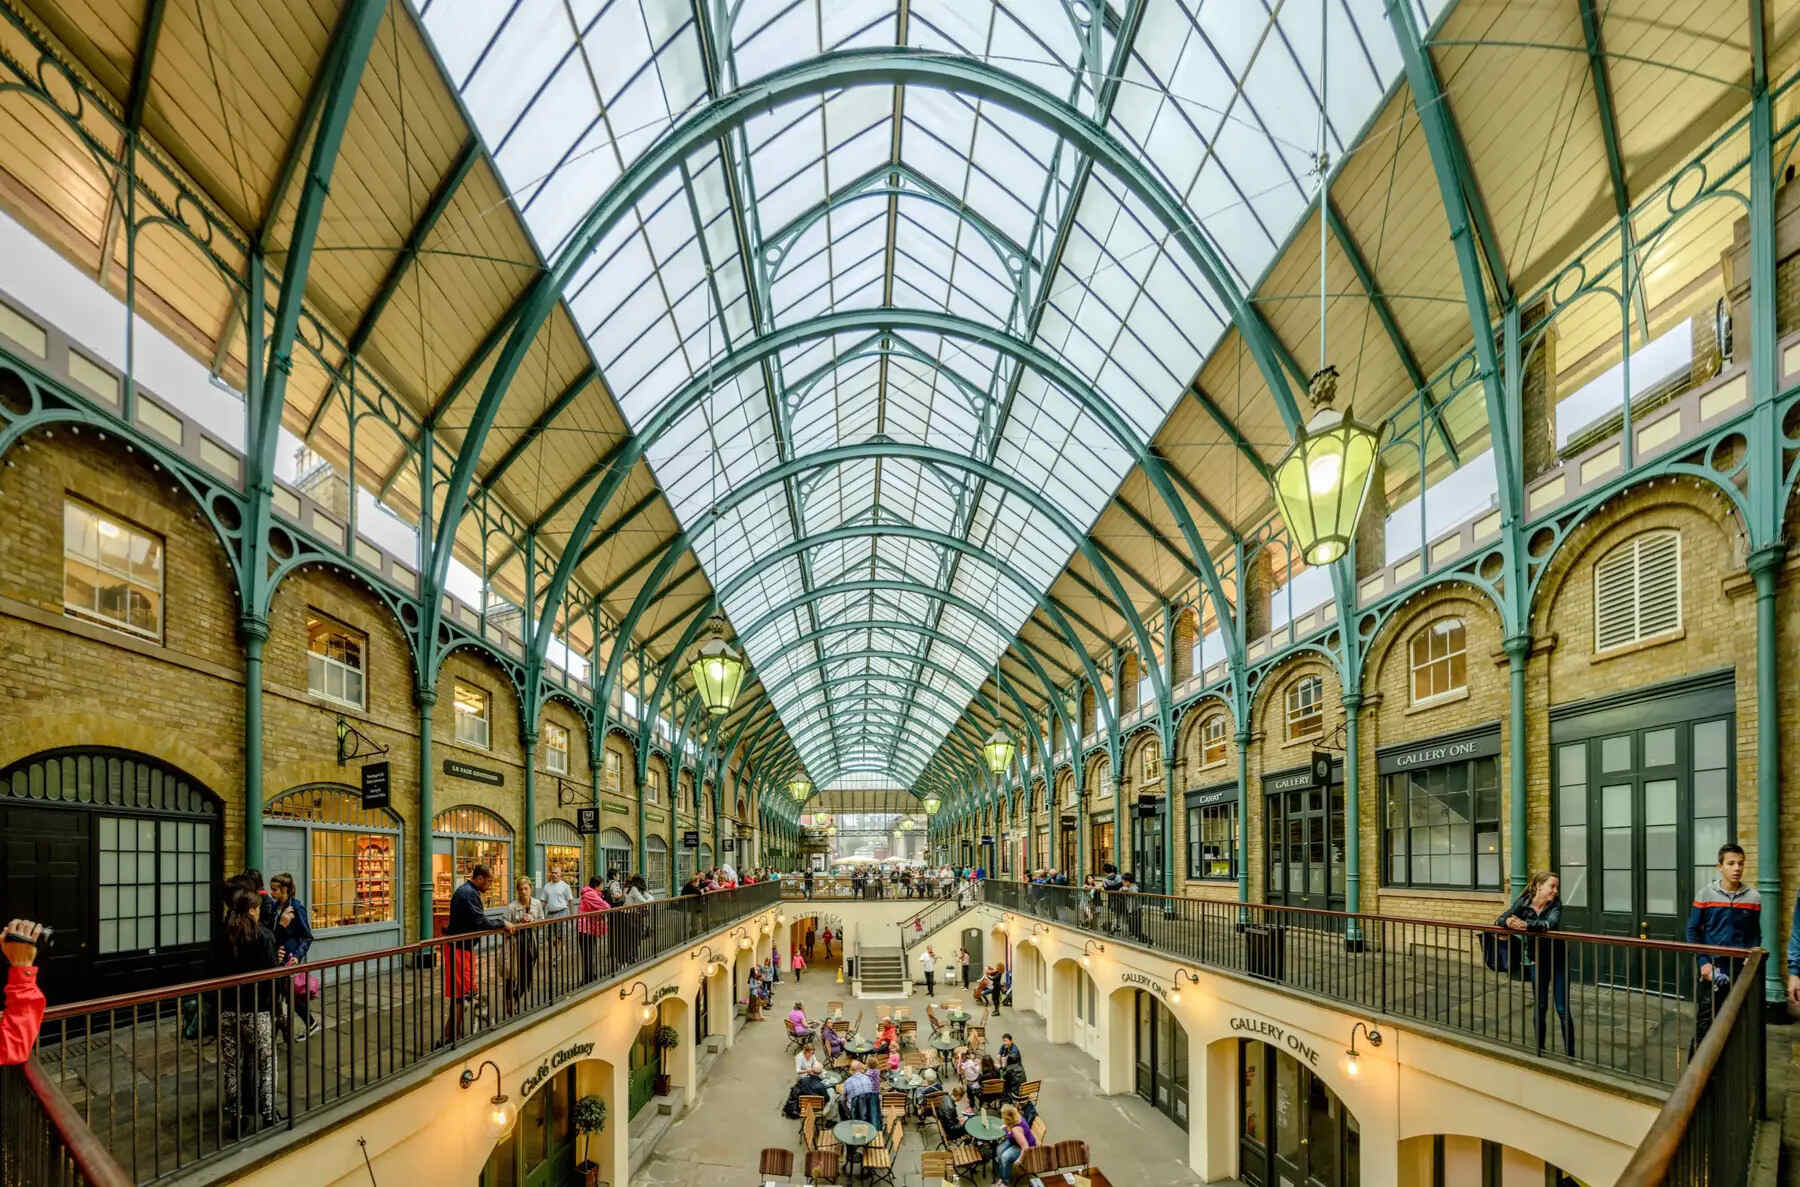 13 Fascinating Facts About Covent Garden Market (London)